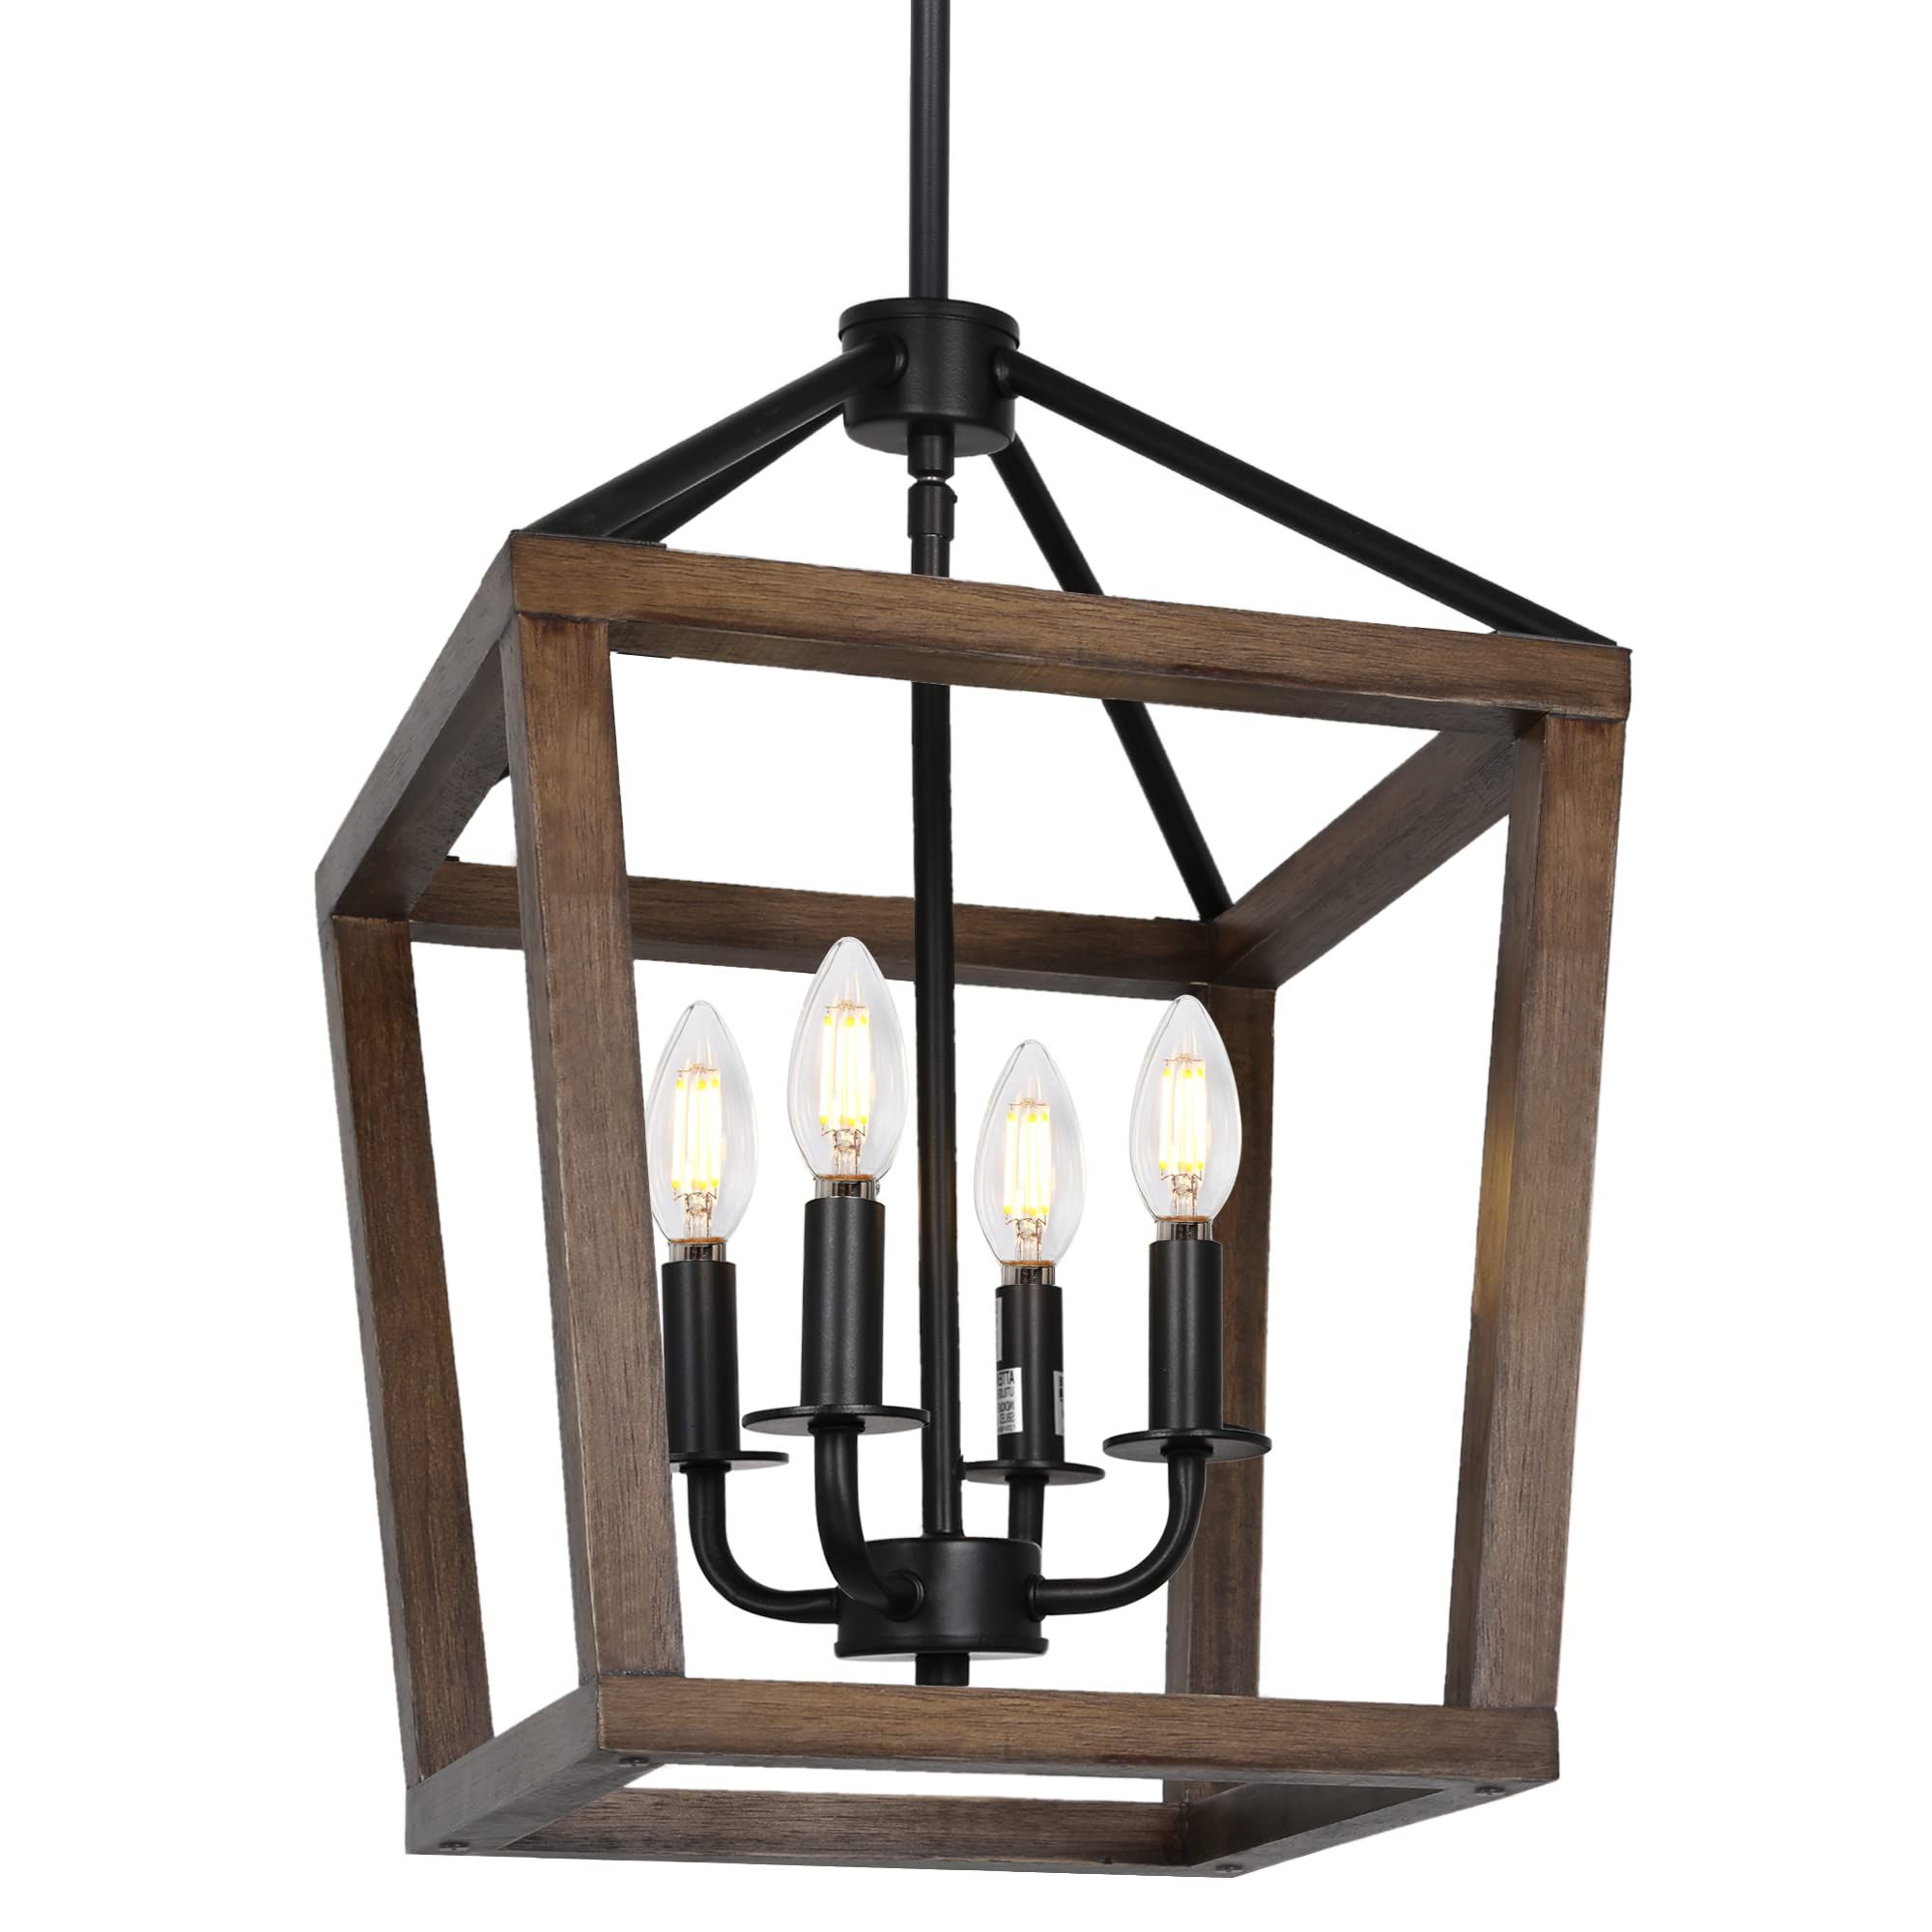 Distressed Oak Lantern Chandeliers Regarding Most Recently Released 4 Light Rustic Chandelier, Classic Lantern Pendant Light With Oak Wood And  Iron Finish, Farmhouse Lighting Fixtures For Dining Room, Kitchen, Hallway  – – Amazon (View 2 of 10)